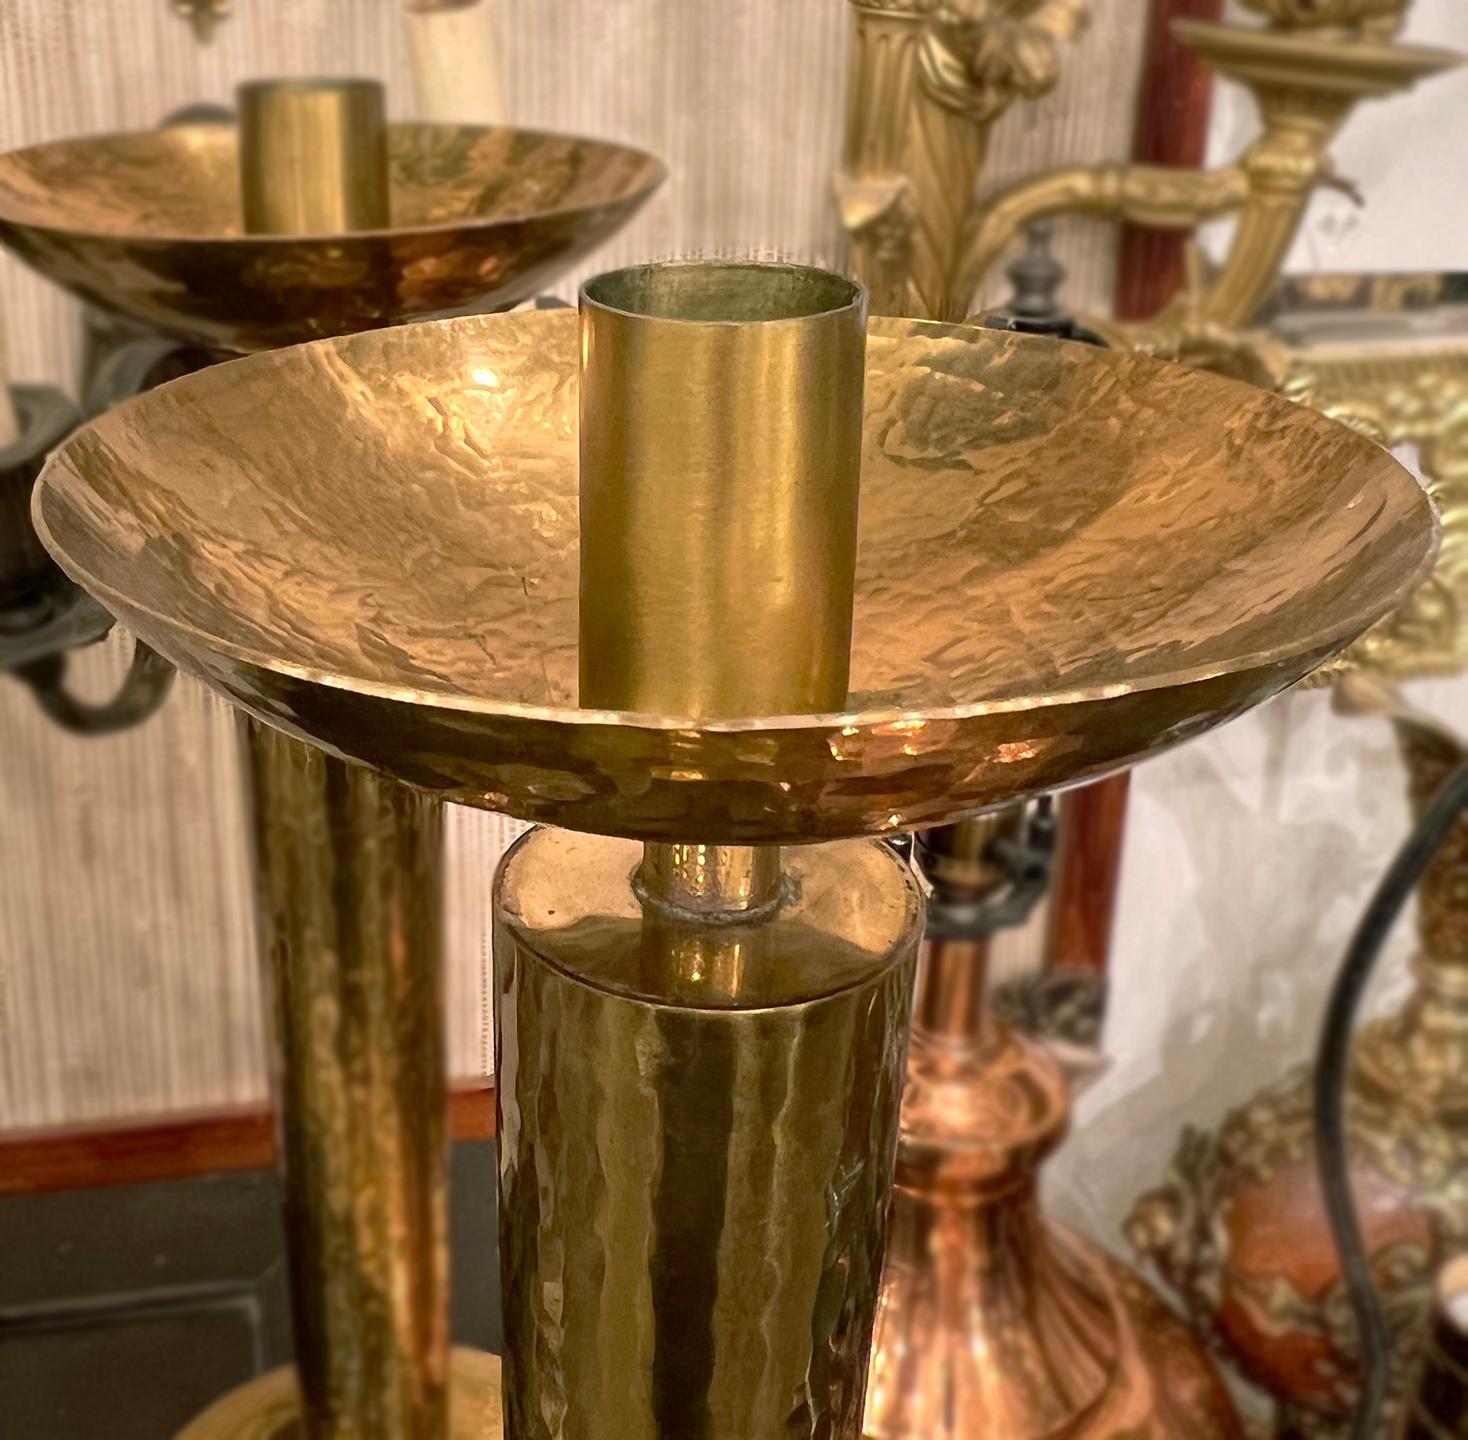 A pair of circa 1920's Italian gilt metal candlesticks with hammered finish.

Measurements:
Height: 15.5?
Diameter: 6? (widest point).